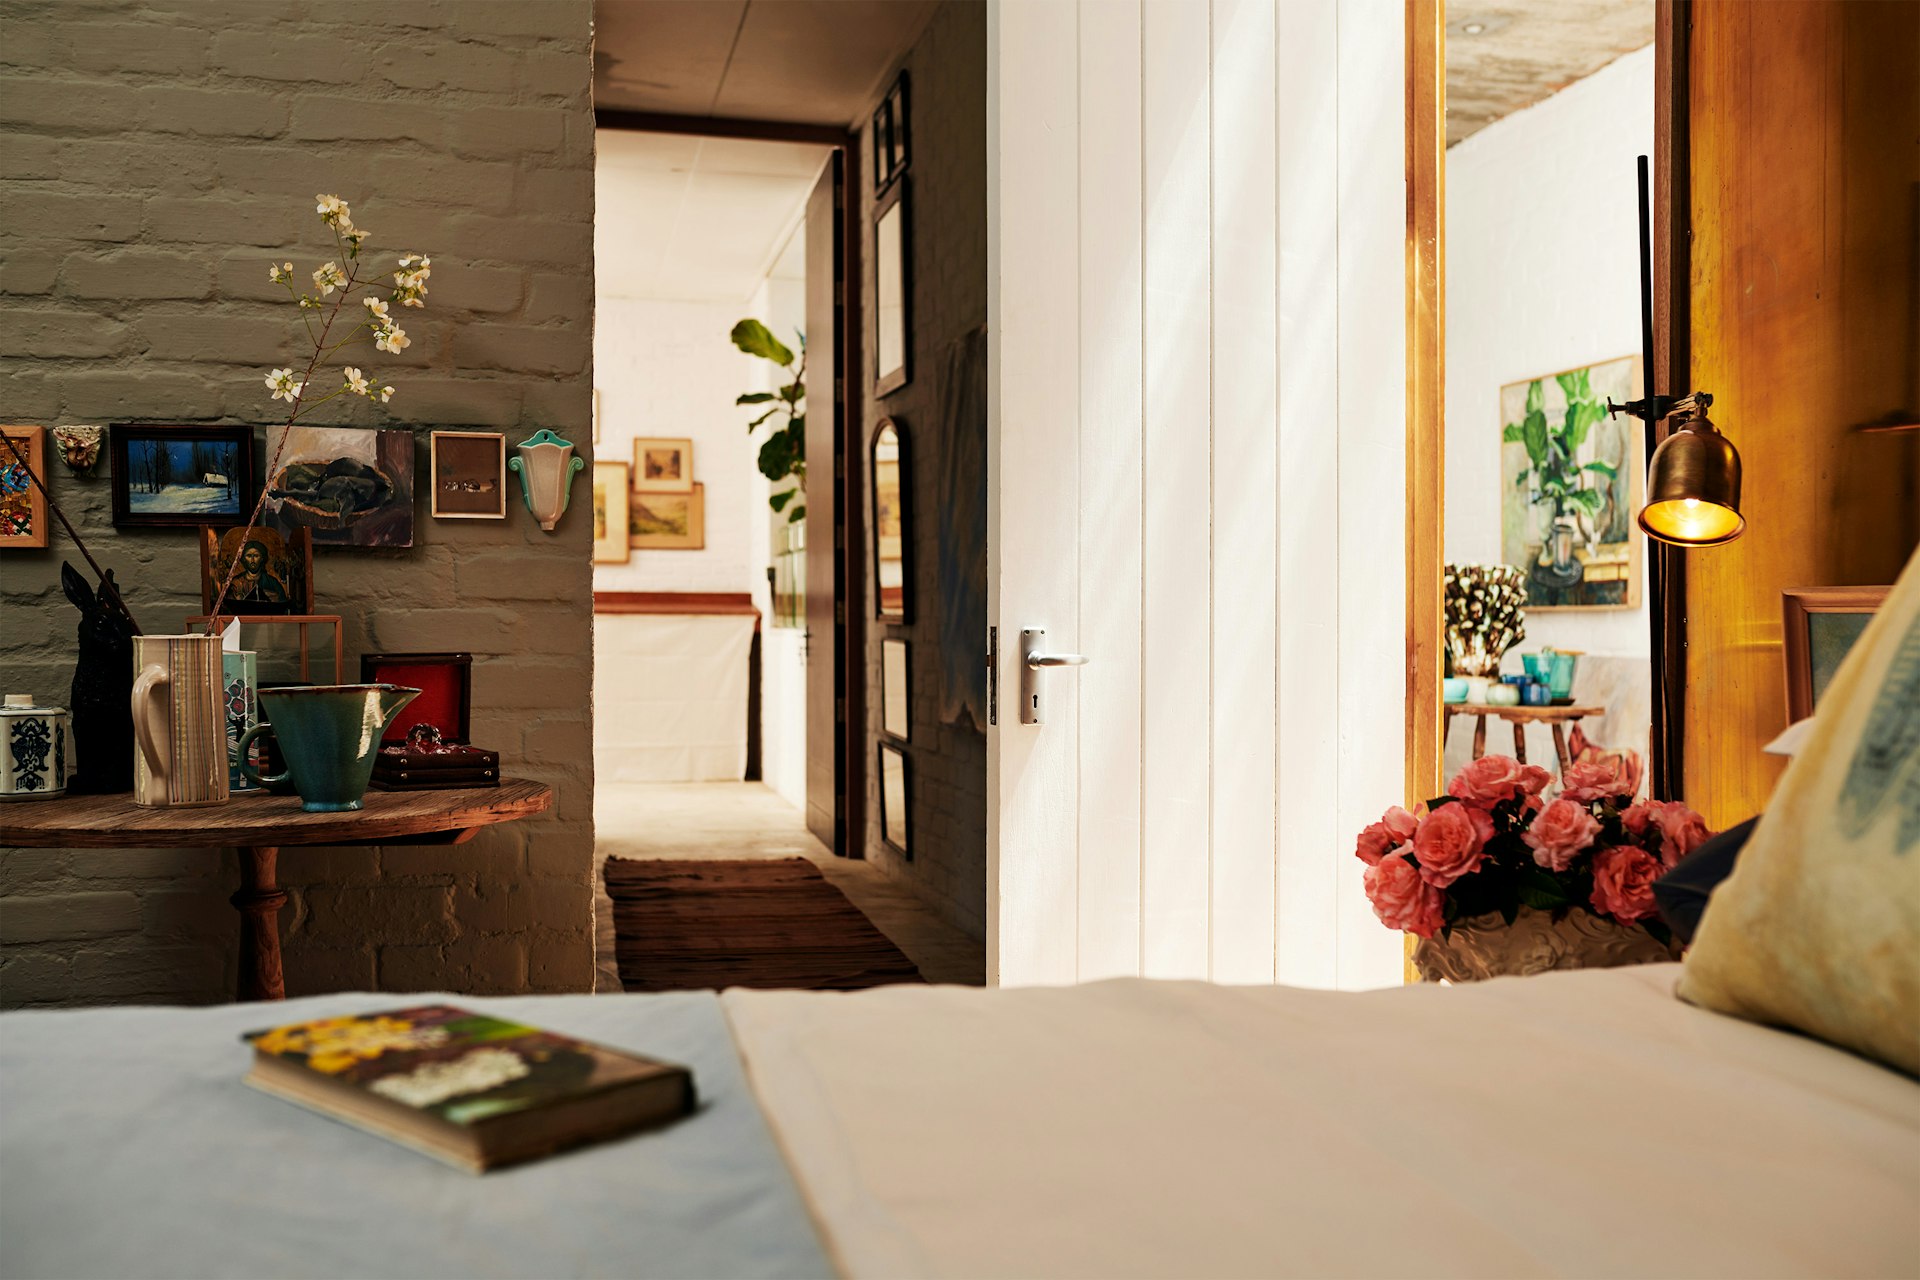 A bedroom with flowers and natural light coming in from the door